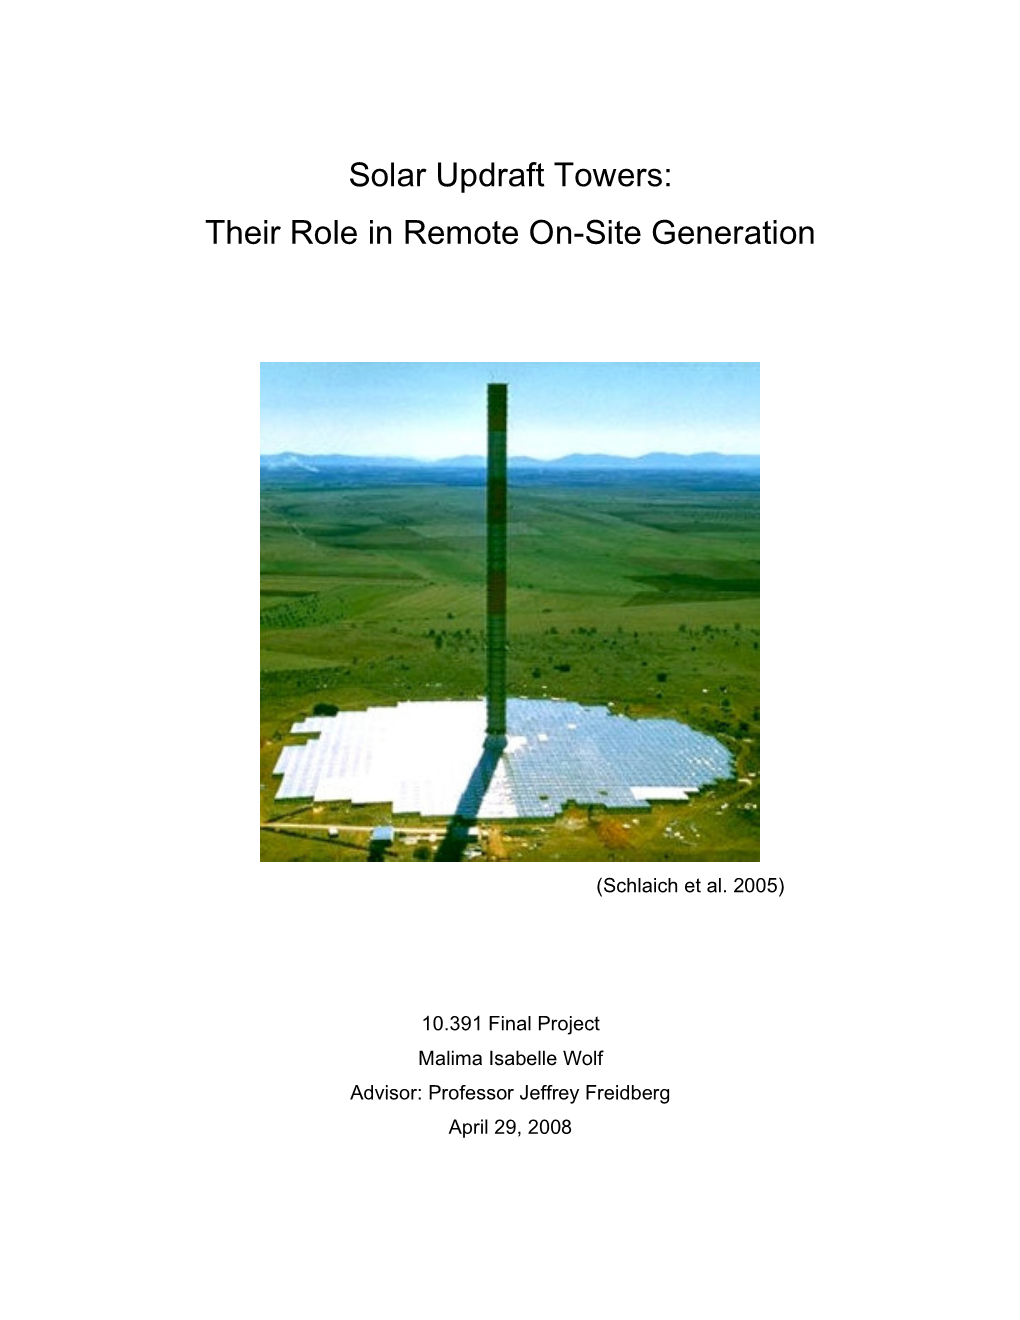 Solar Updraft Towers: Their Role in Remote On-Site Generation